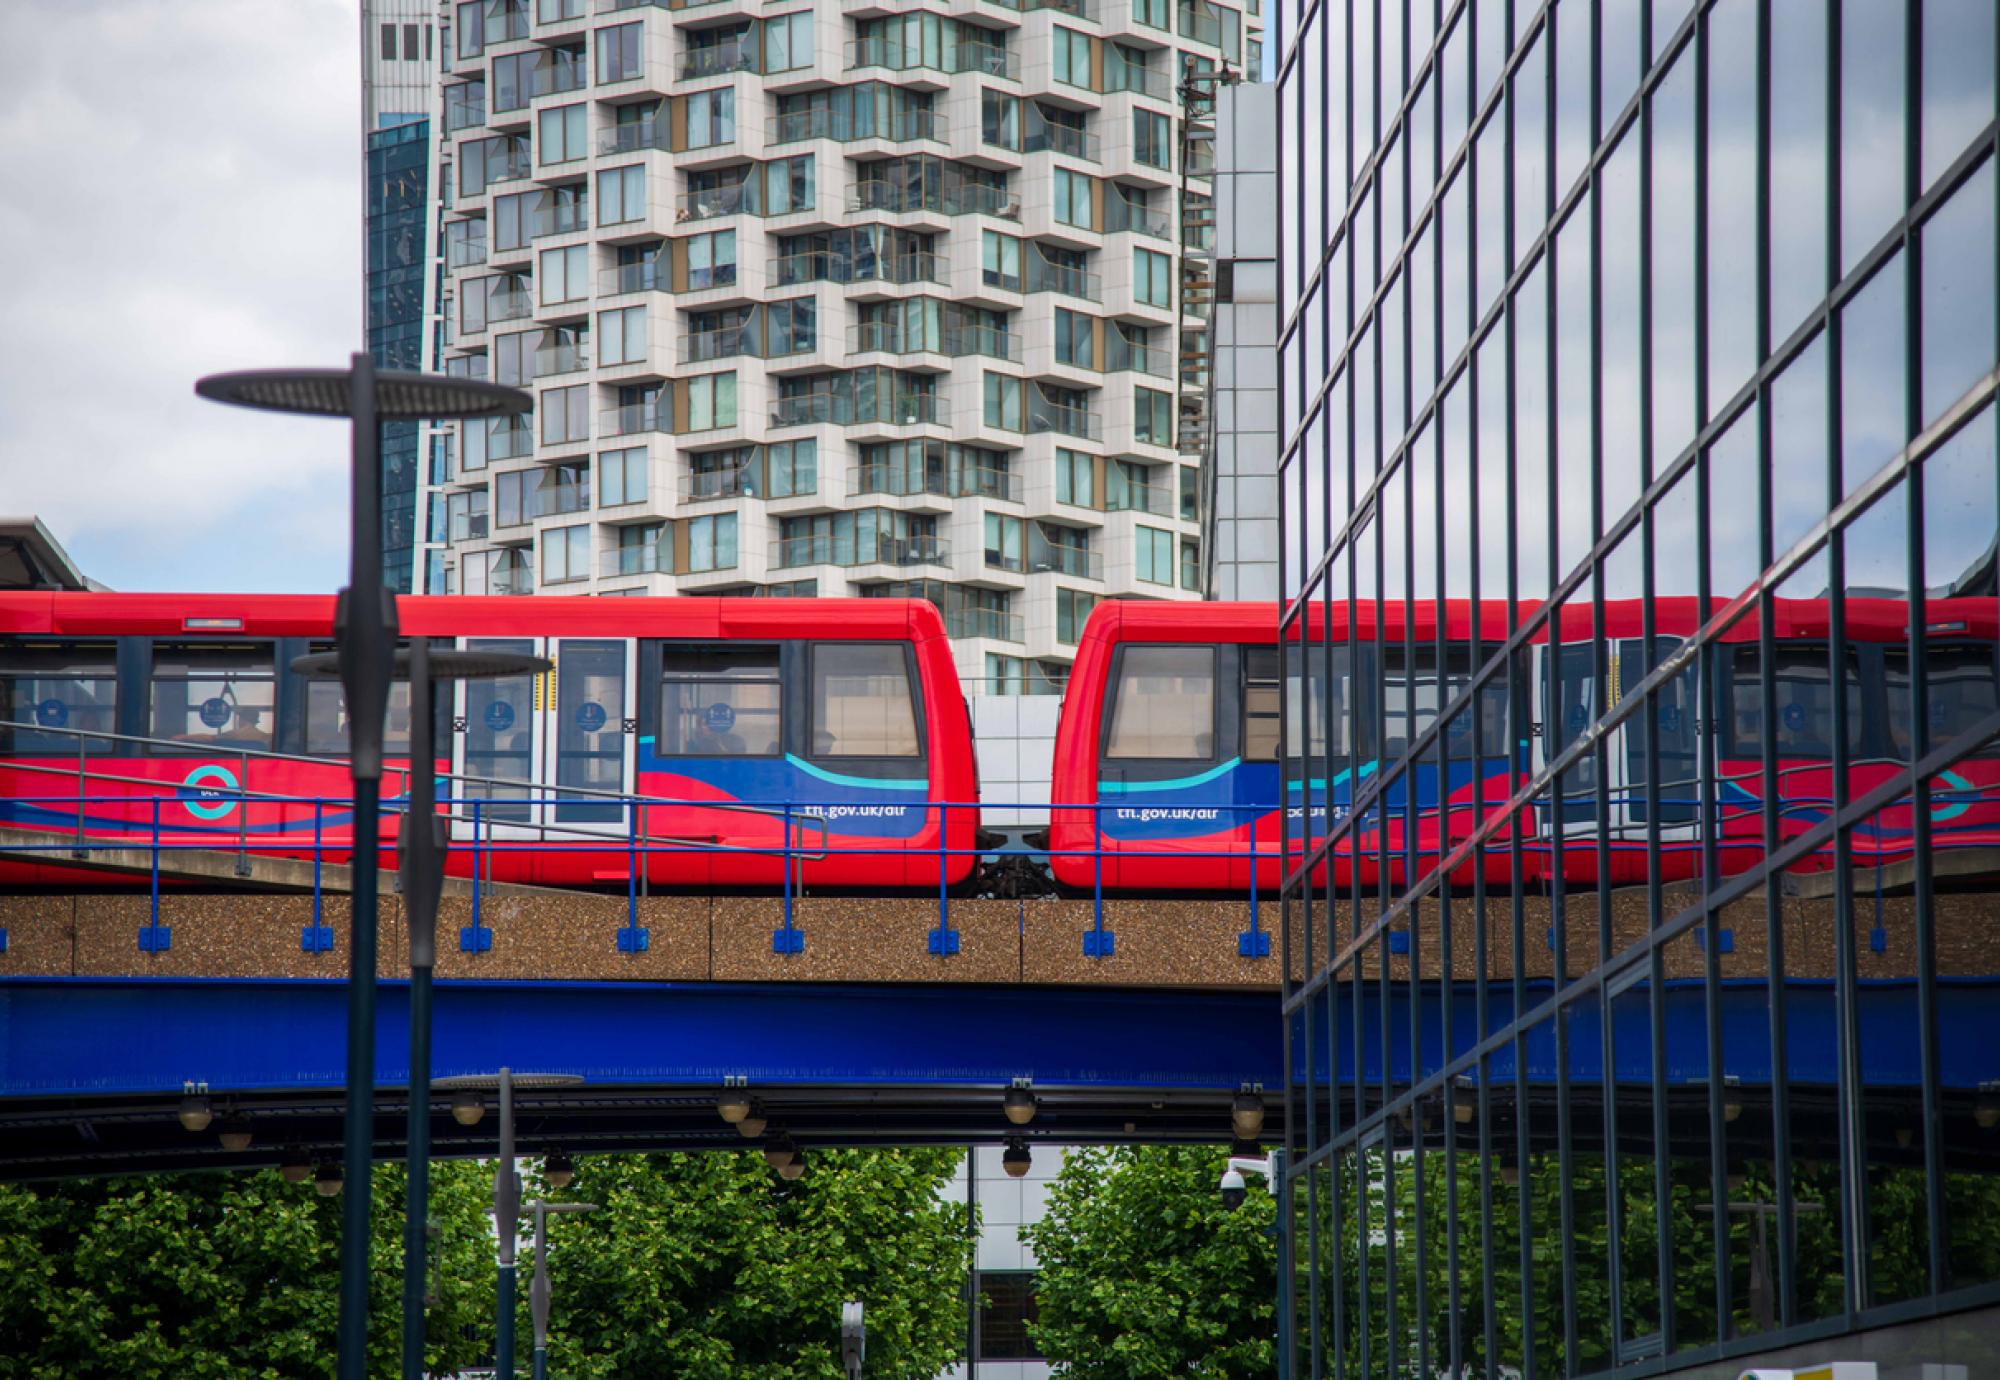 DLR Extension plans outlined by TfL as they submit business case to Government